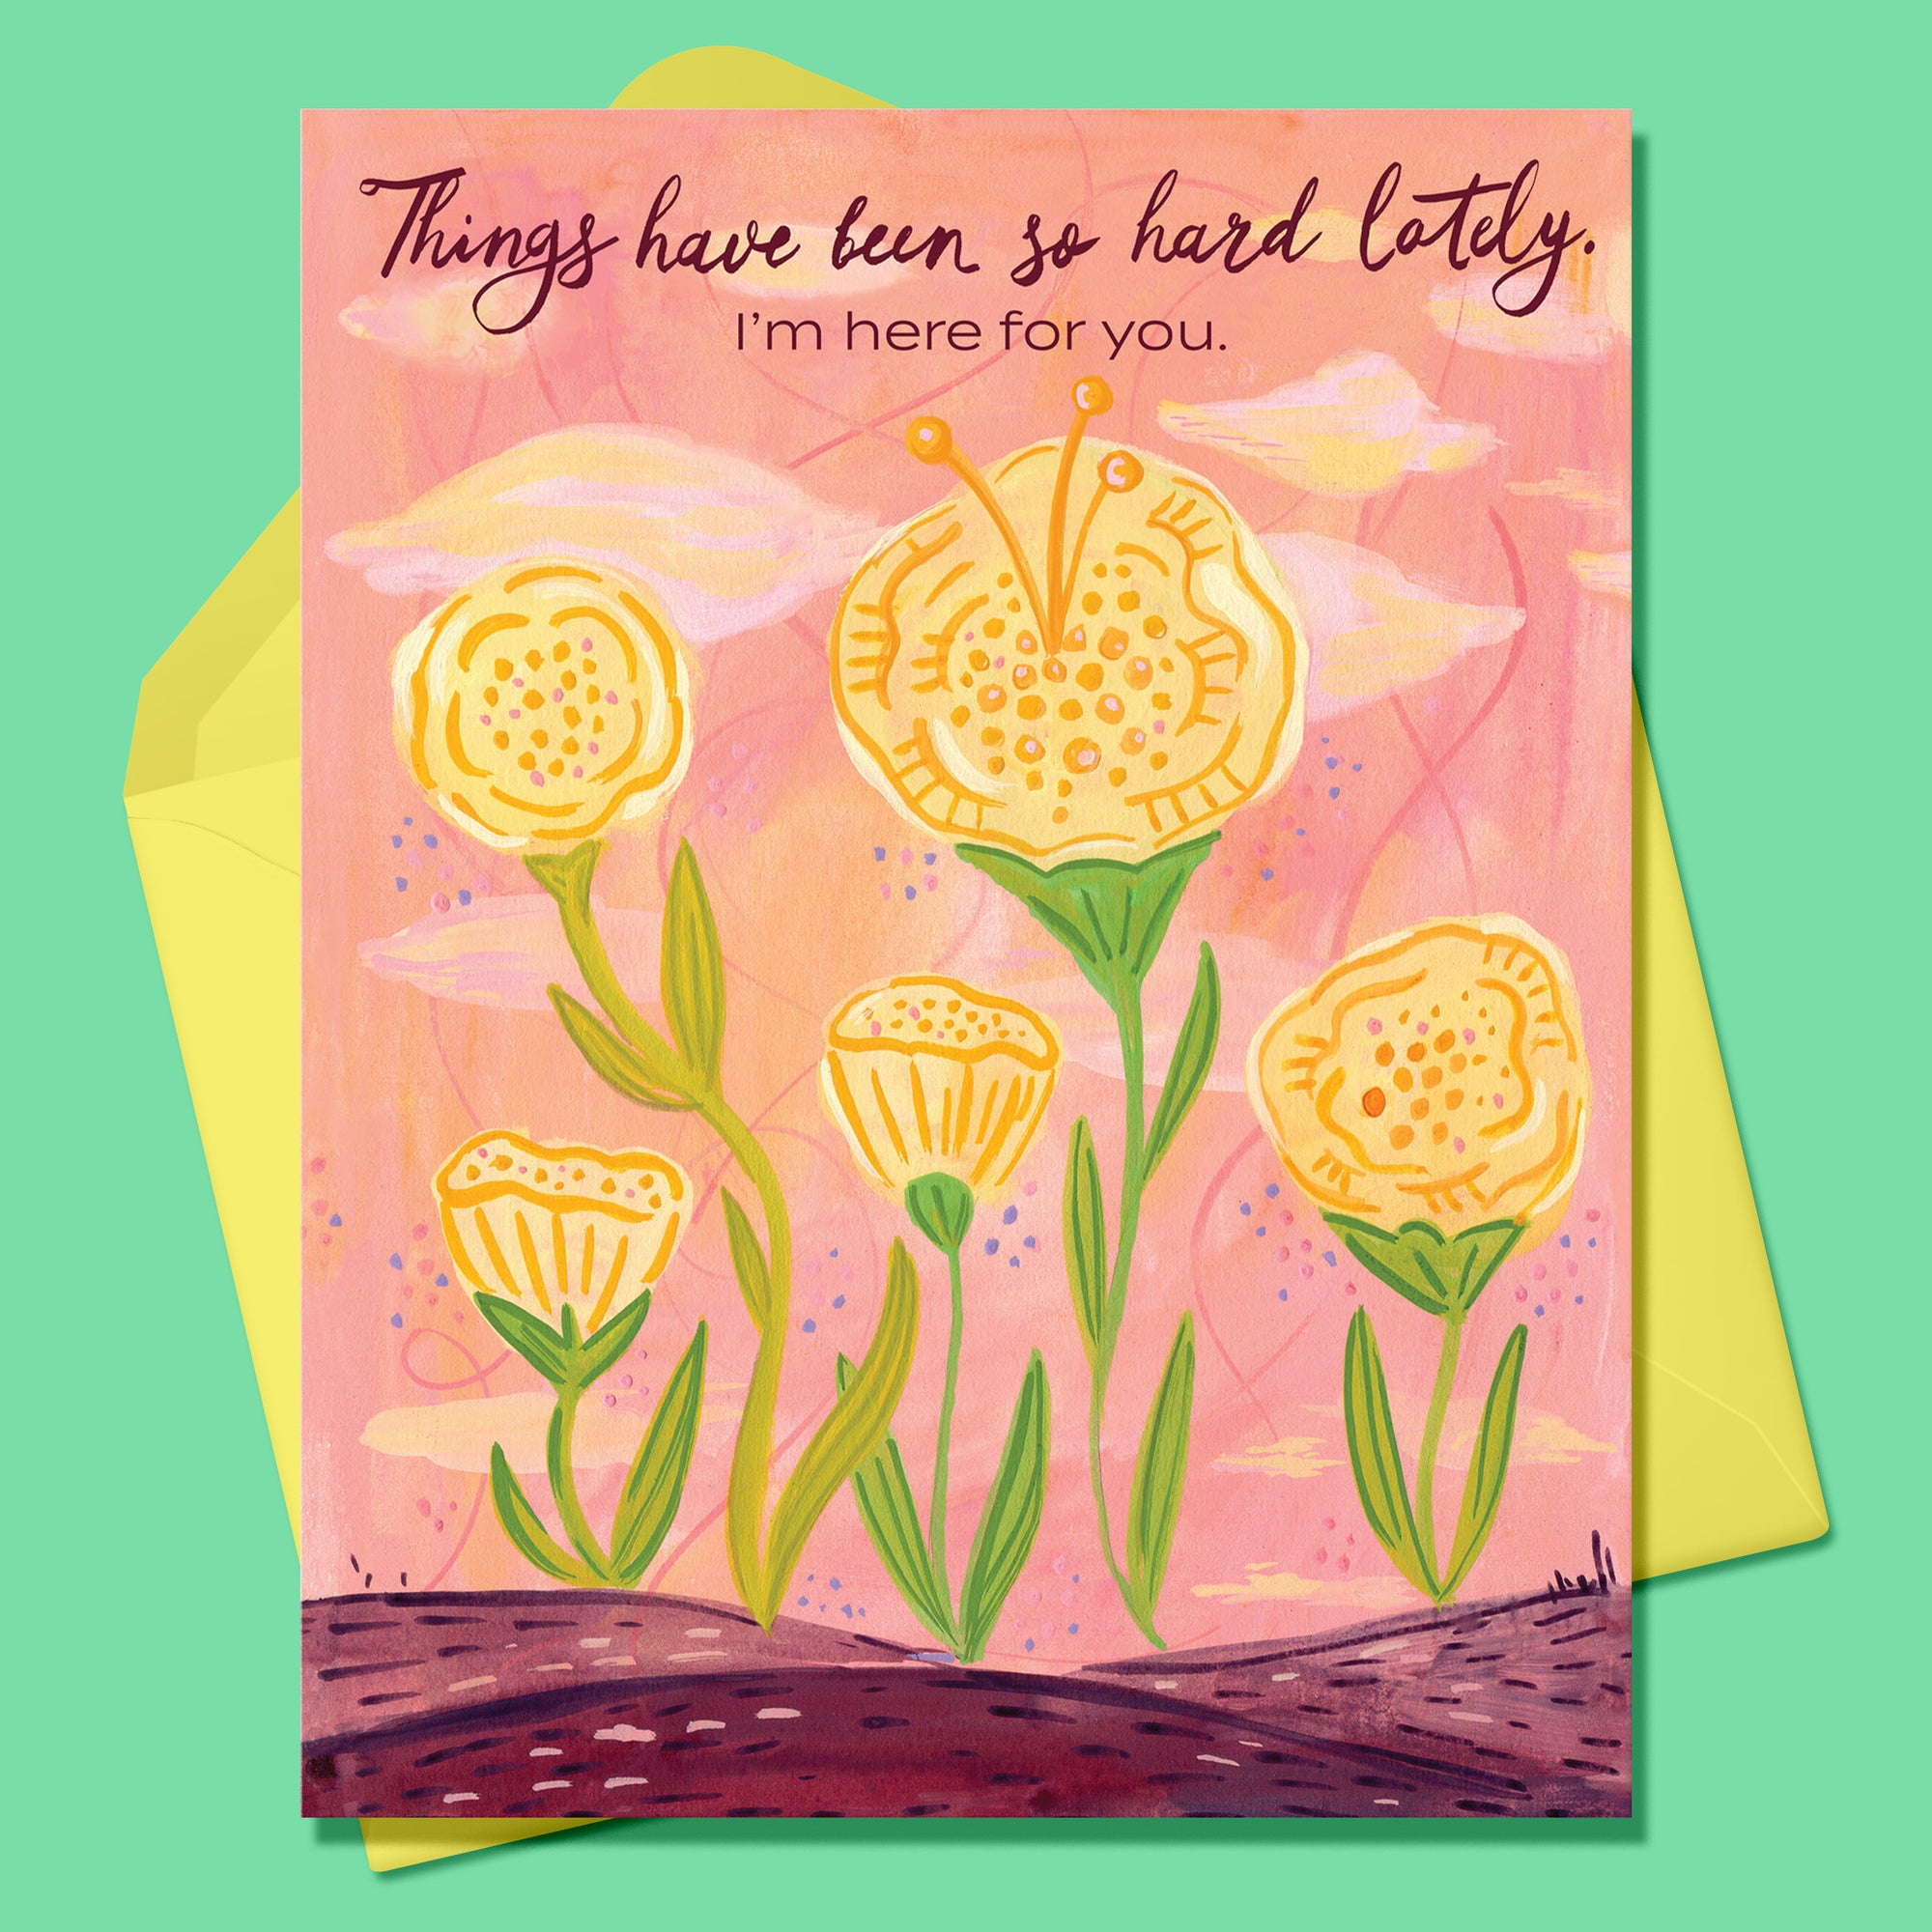 Paper Greeting card with 5 yellow flowers and green stems. Text says Things have been so hard lately. I'm here for you. Yellow envelope on a dark mint background.